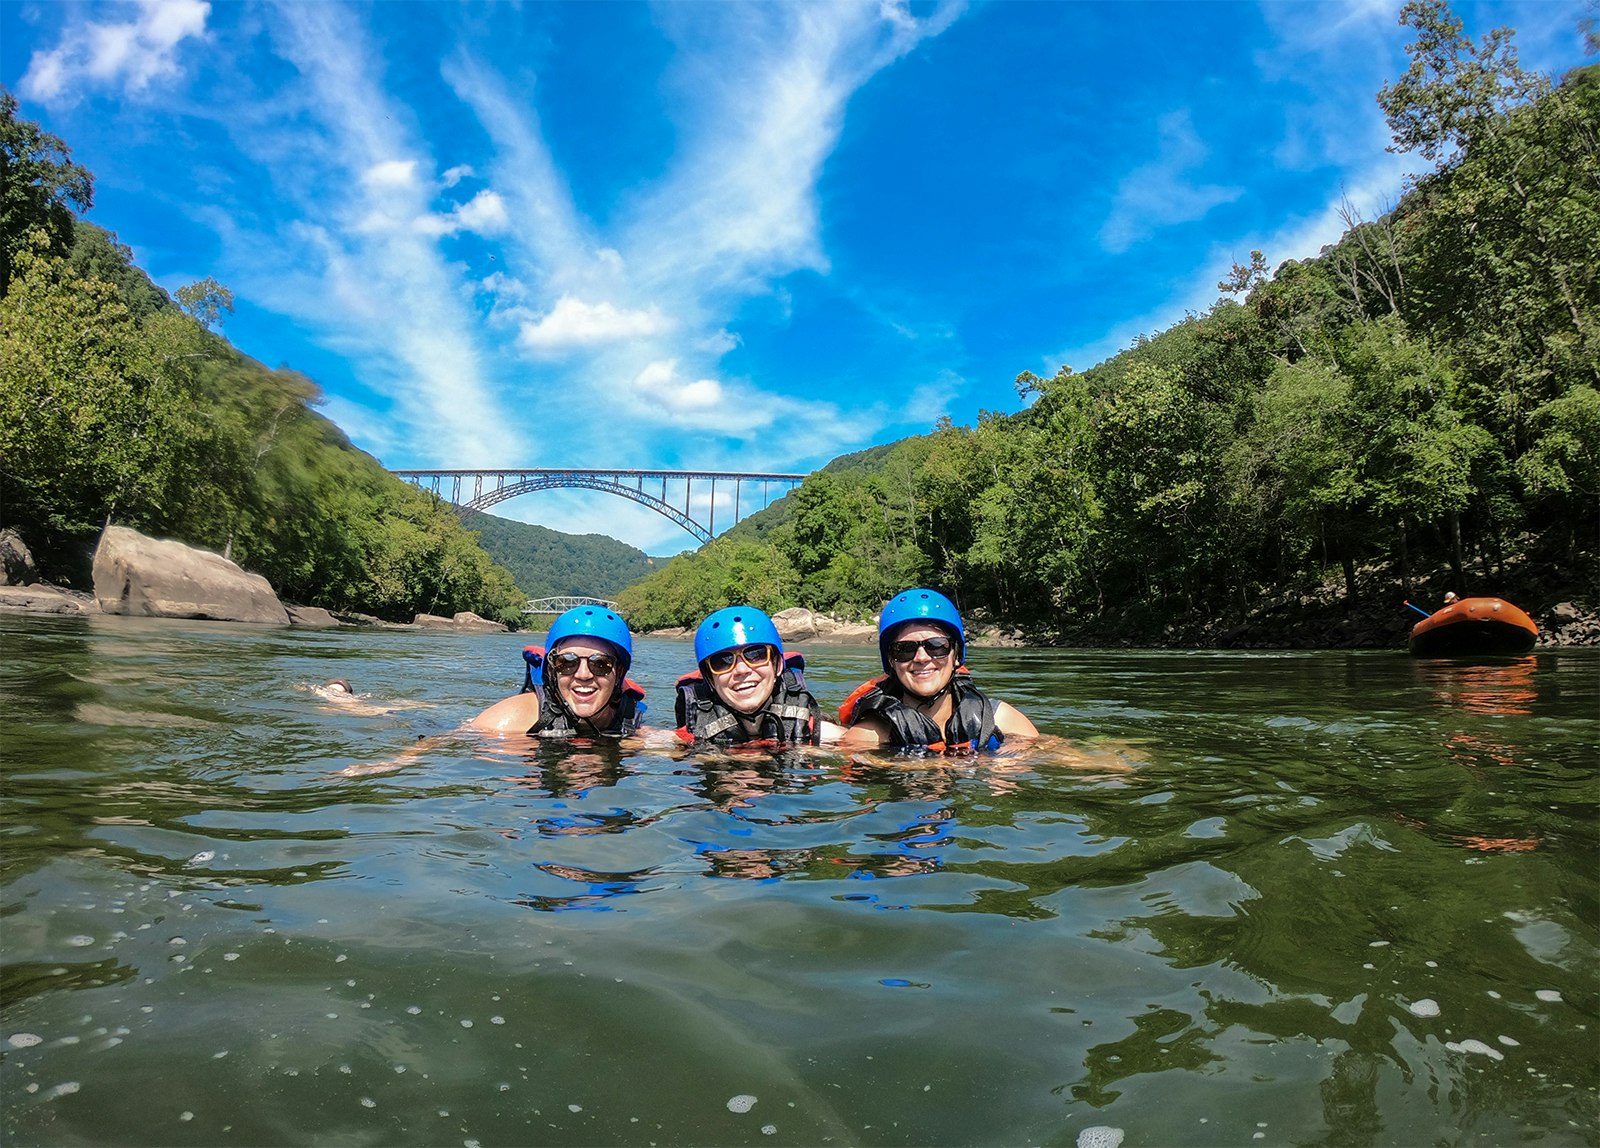 Three women float in a river under a blue sky in a tree-lined gorge. A single-arch bridge spans the river in the background